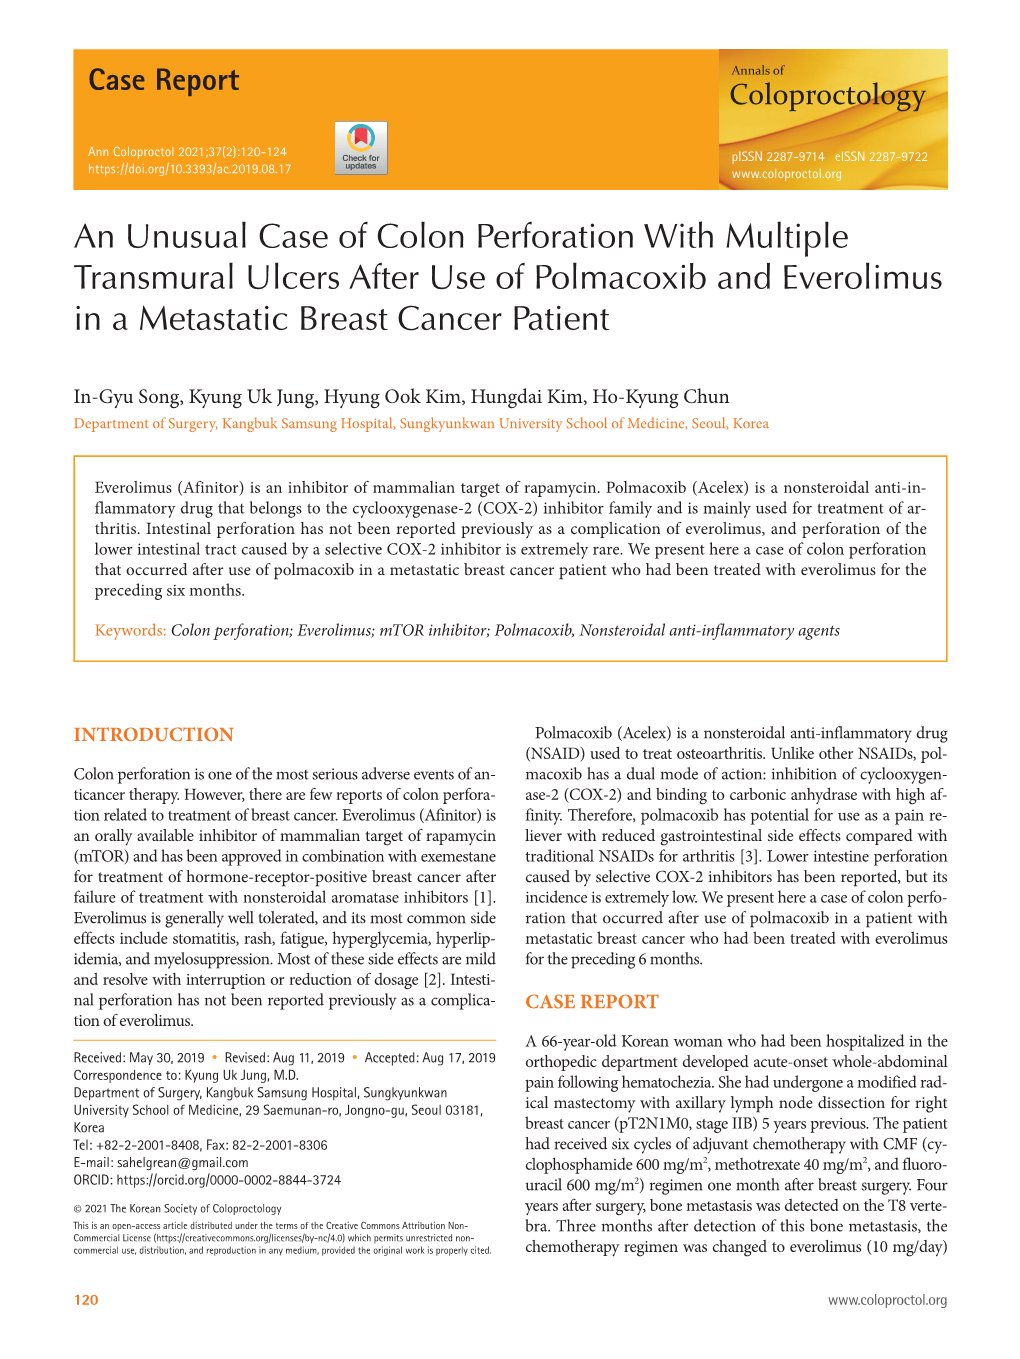 An Unusual Case of Colon Perforation with Multiple Transmural Ulcers After Use of Polmacoxib and Everolimus in a Metastatic Breast Cancer Patient